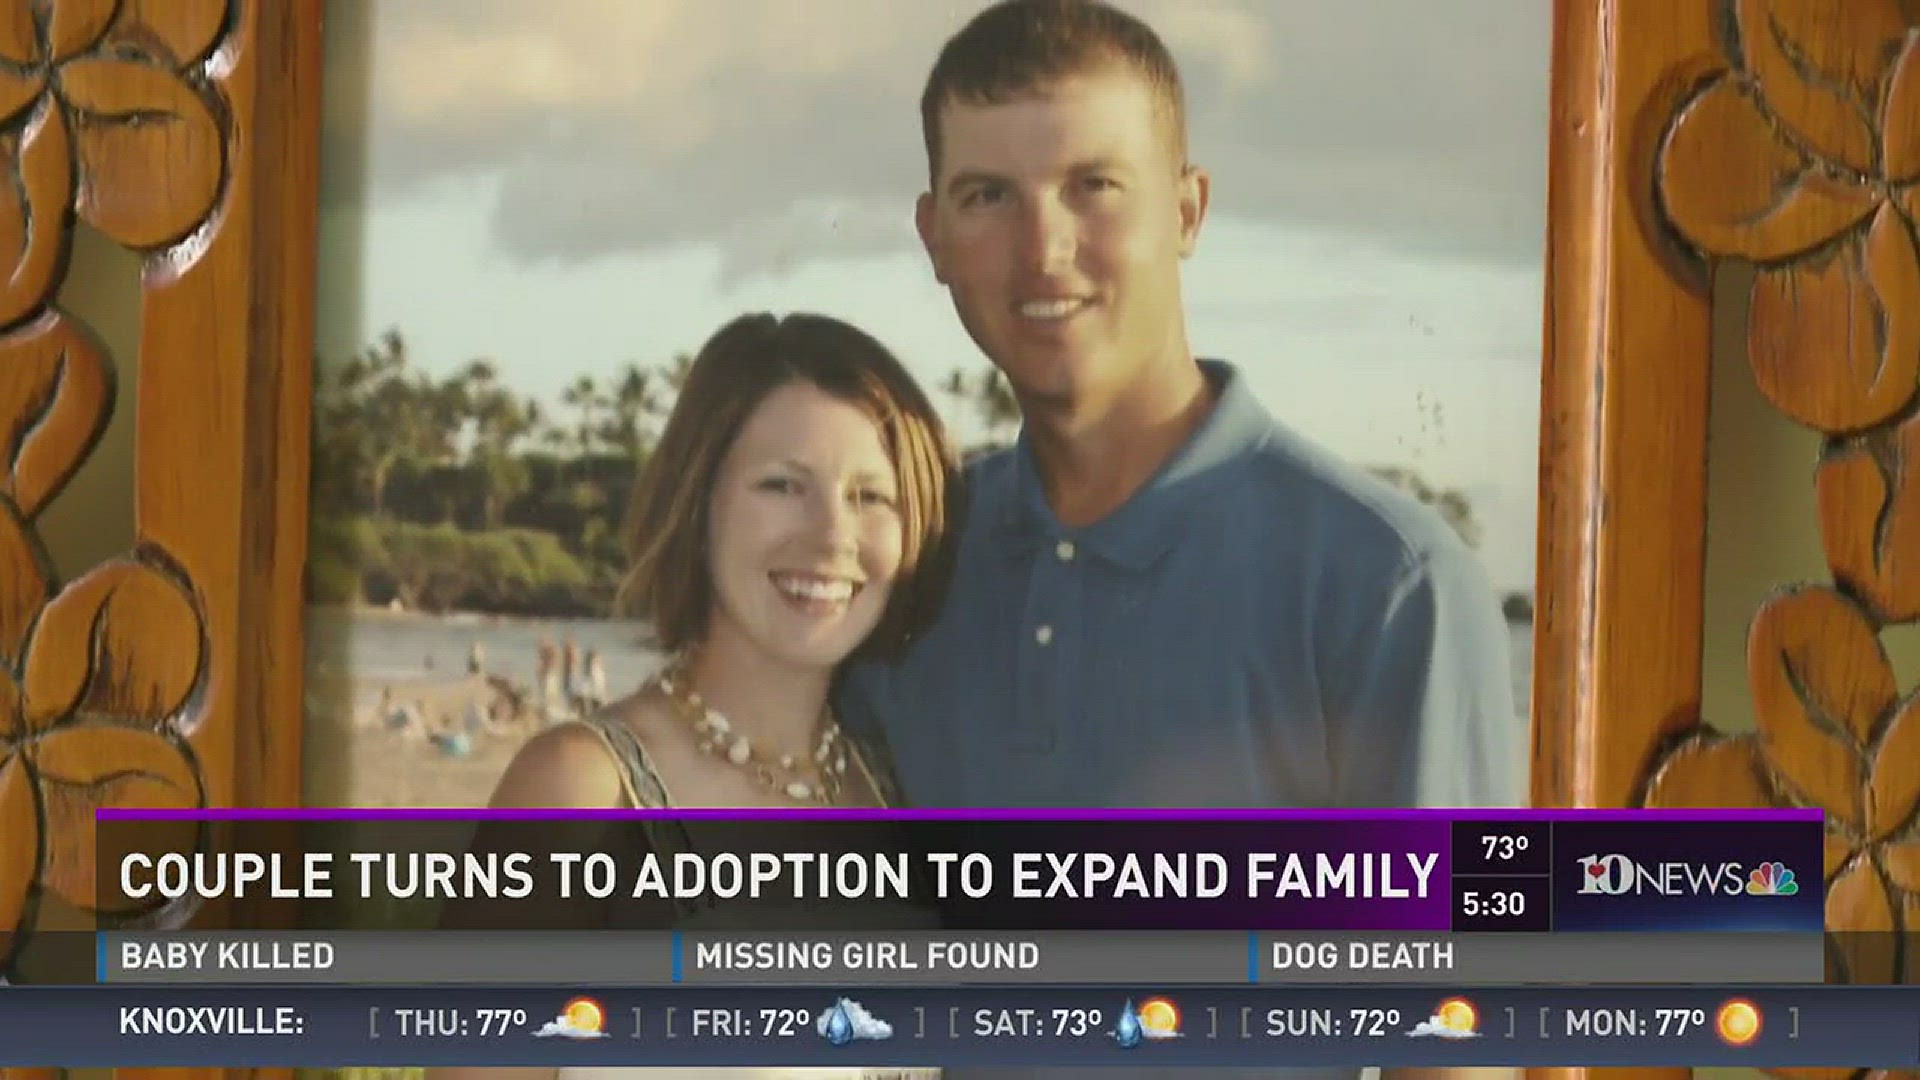 After years of struggle and heartache trying to get pregnant, a local couple hopes to adopt children.